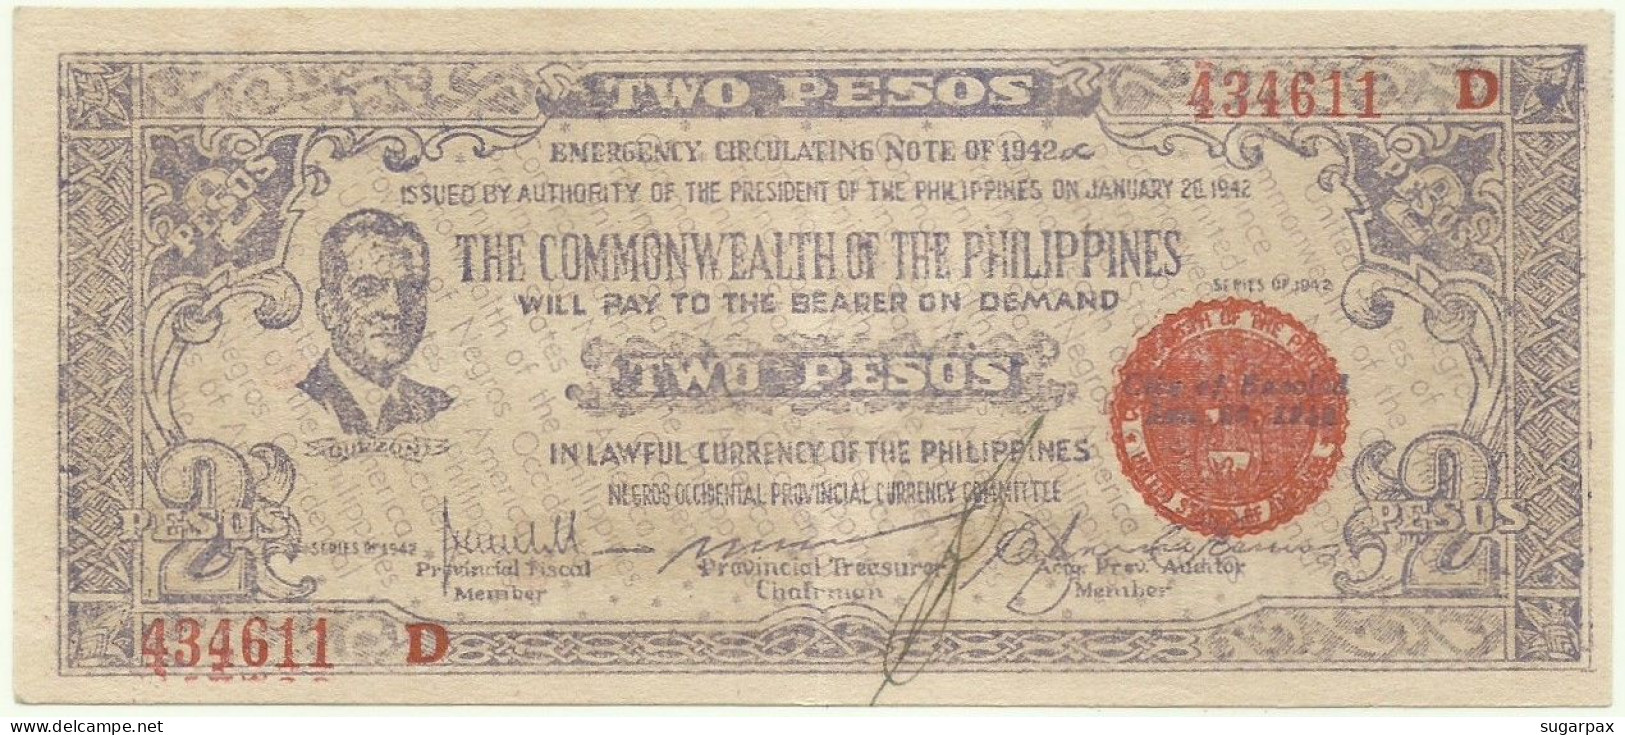 PHILIPPINES - 2 Pesos - 1942 - Pick S 647B - Serie D - NEGROS Occidental Provincial Currency Committee - Philippinen